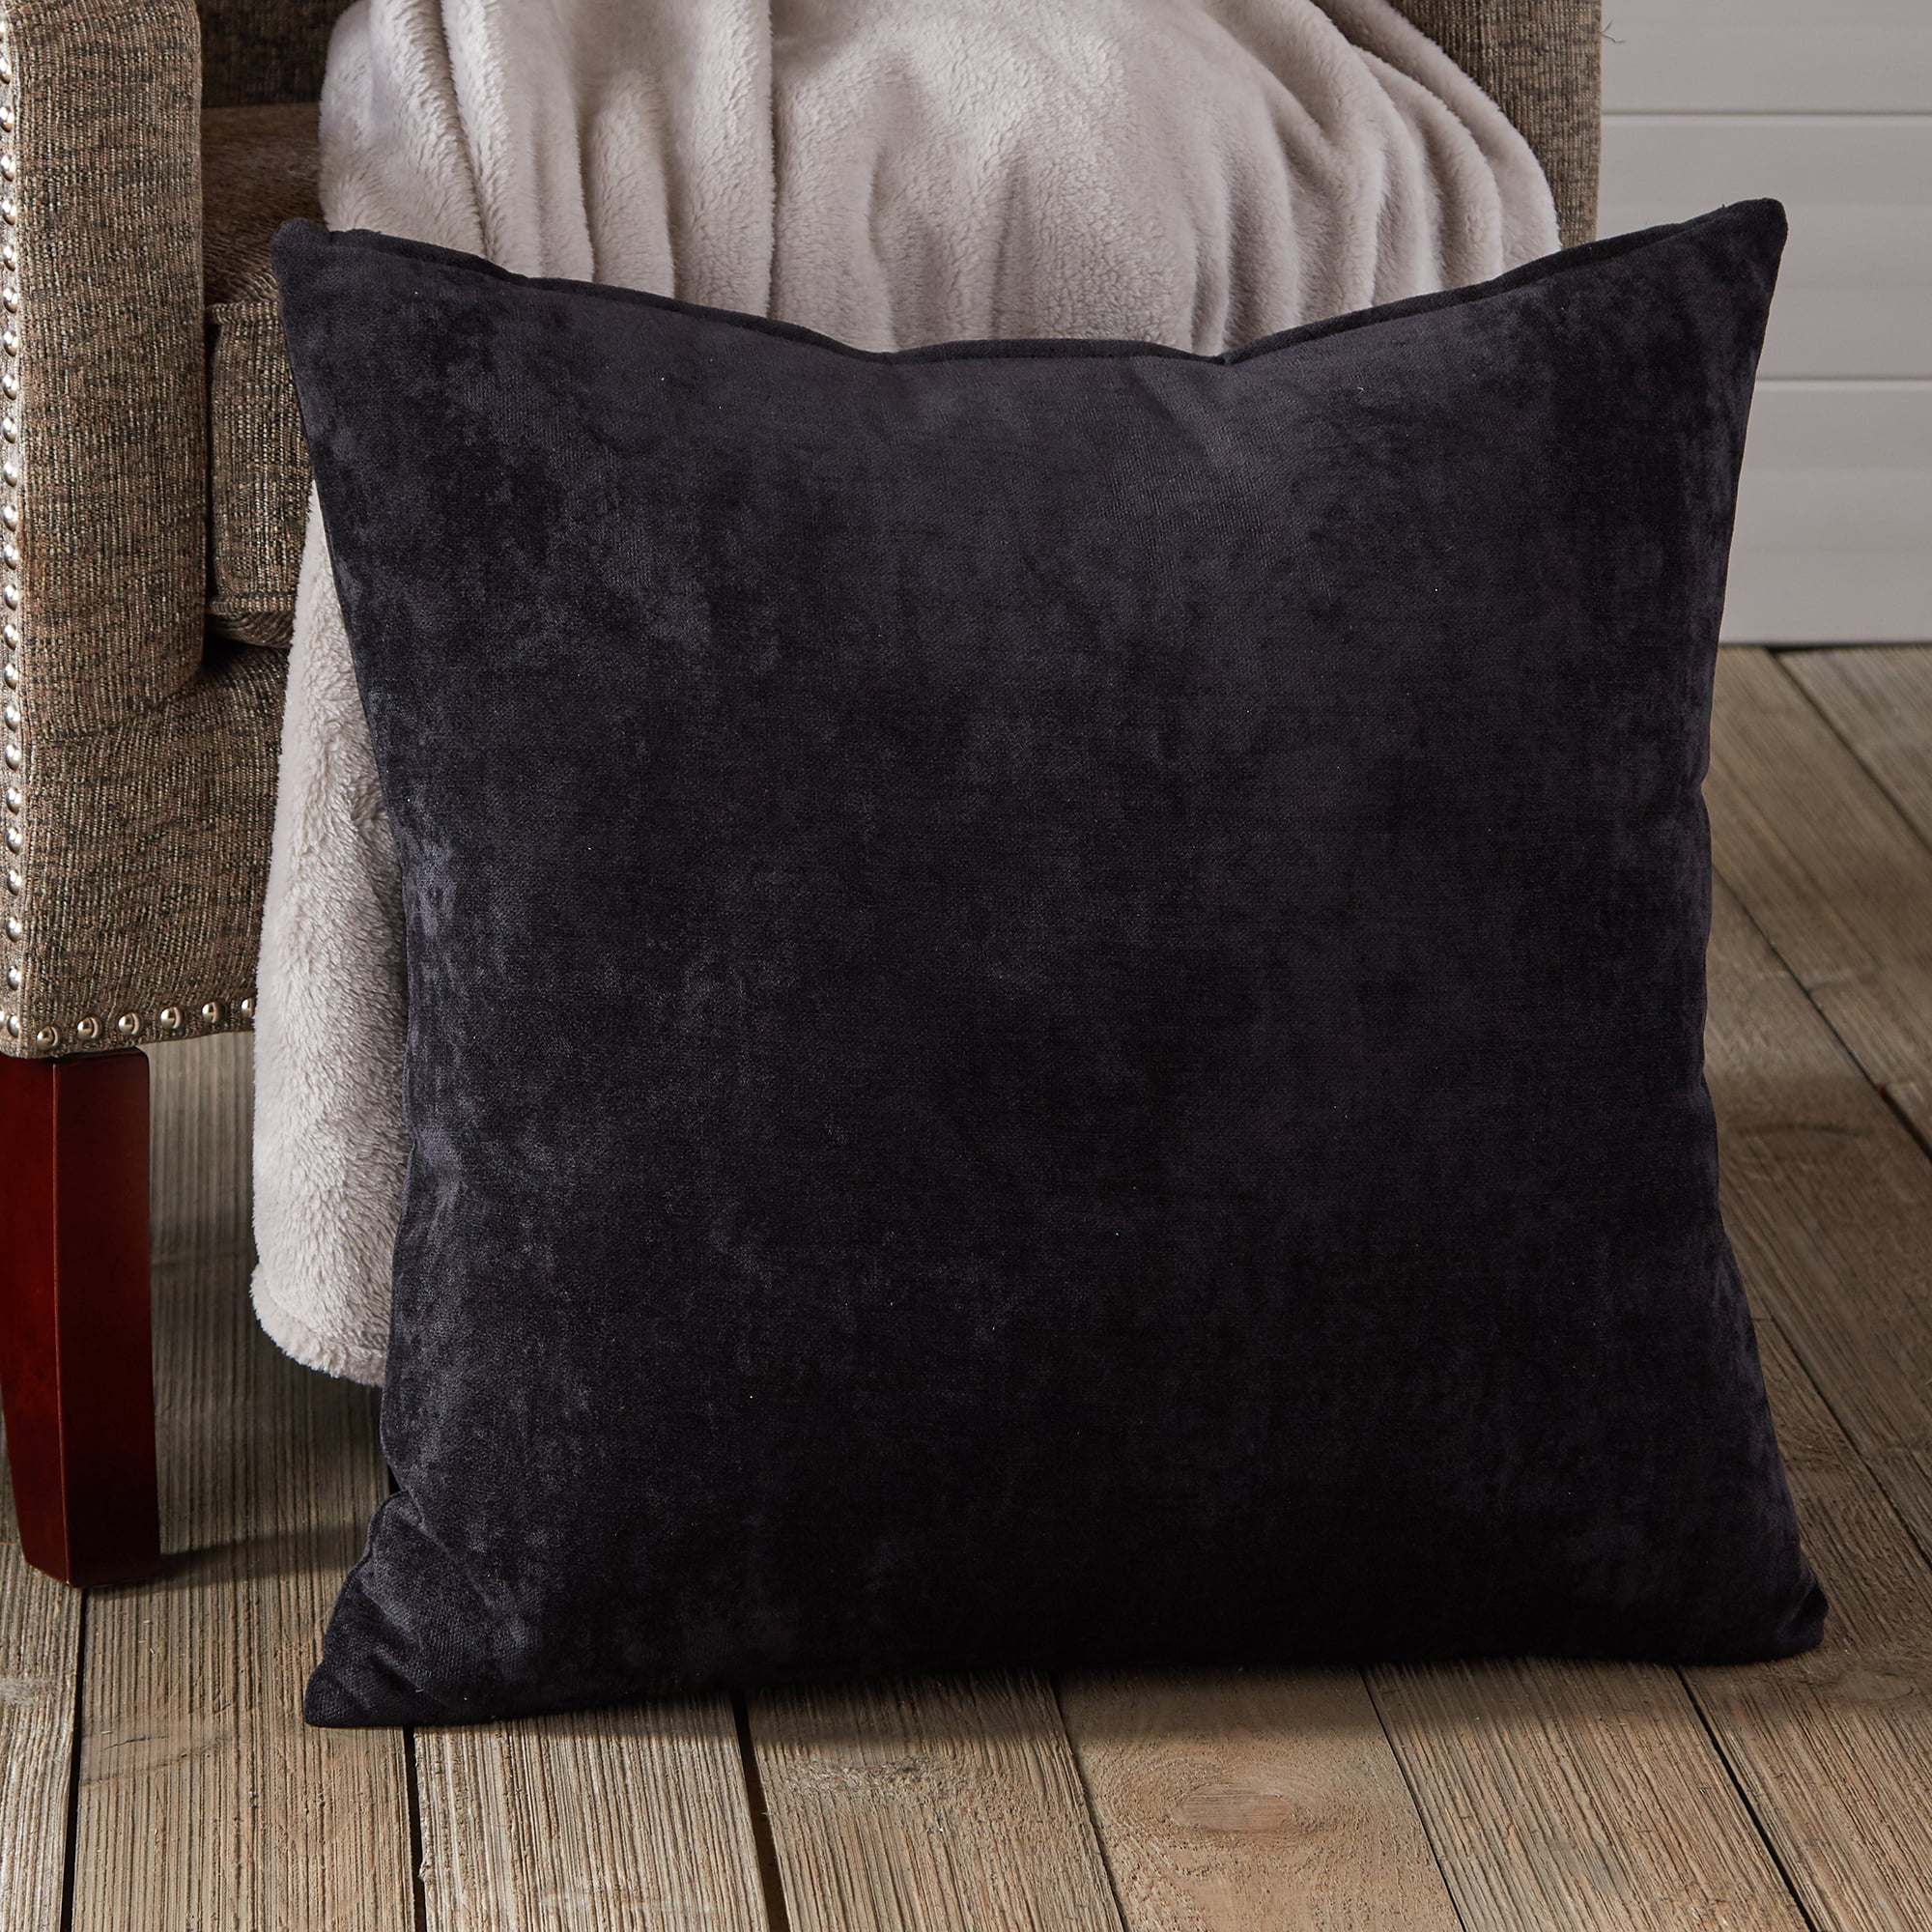 Greendale Home Fashions Jumbo Black Square Tufted Reversible 40 in. x 40  in. Floor Pillow FP5190L-BLACK - The Home Depot